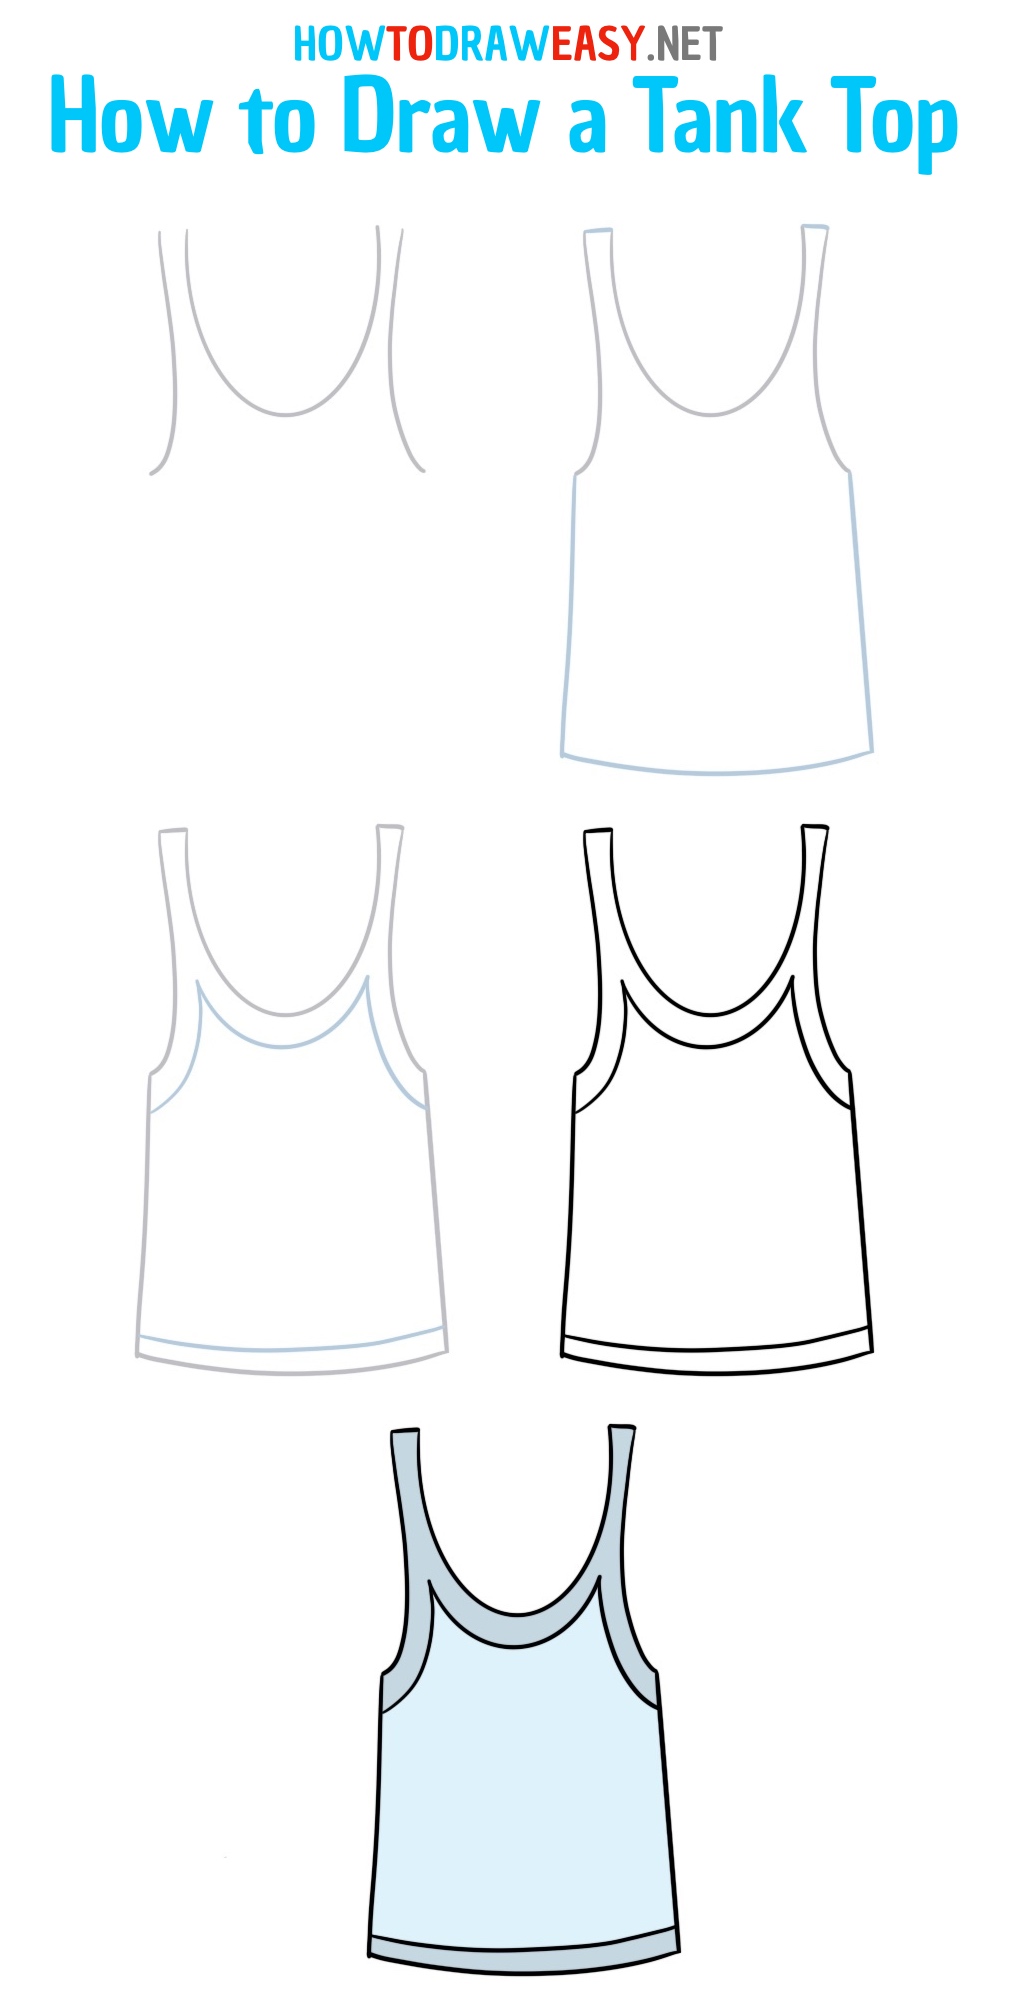 How to Draw a Tank Top Step by Step